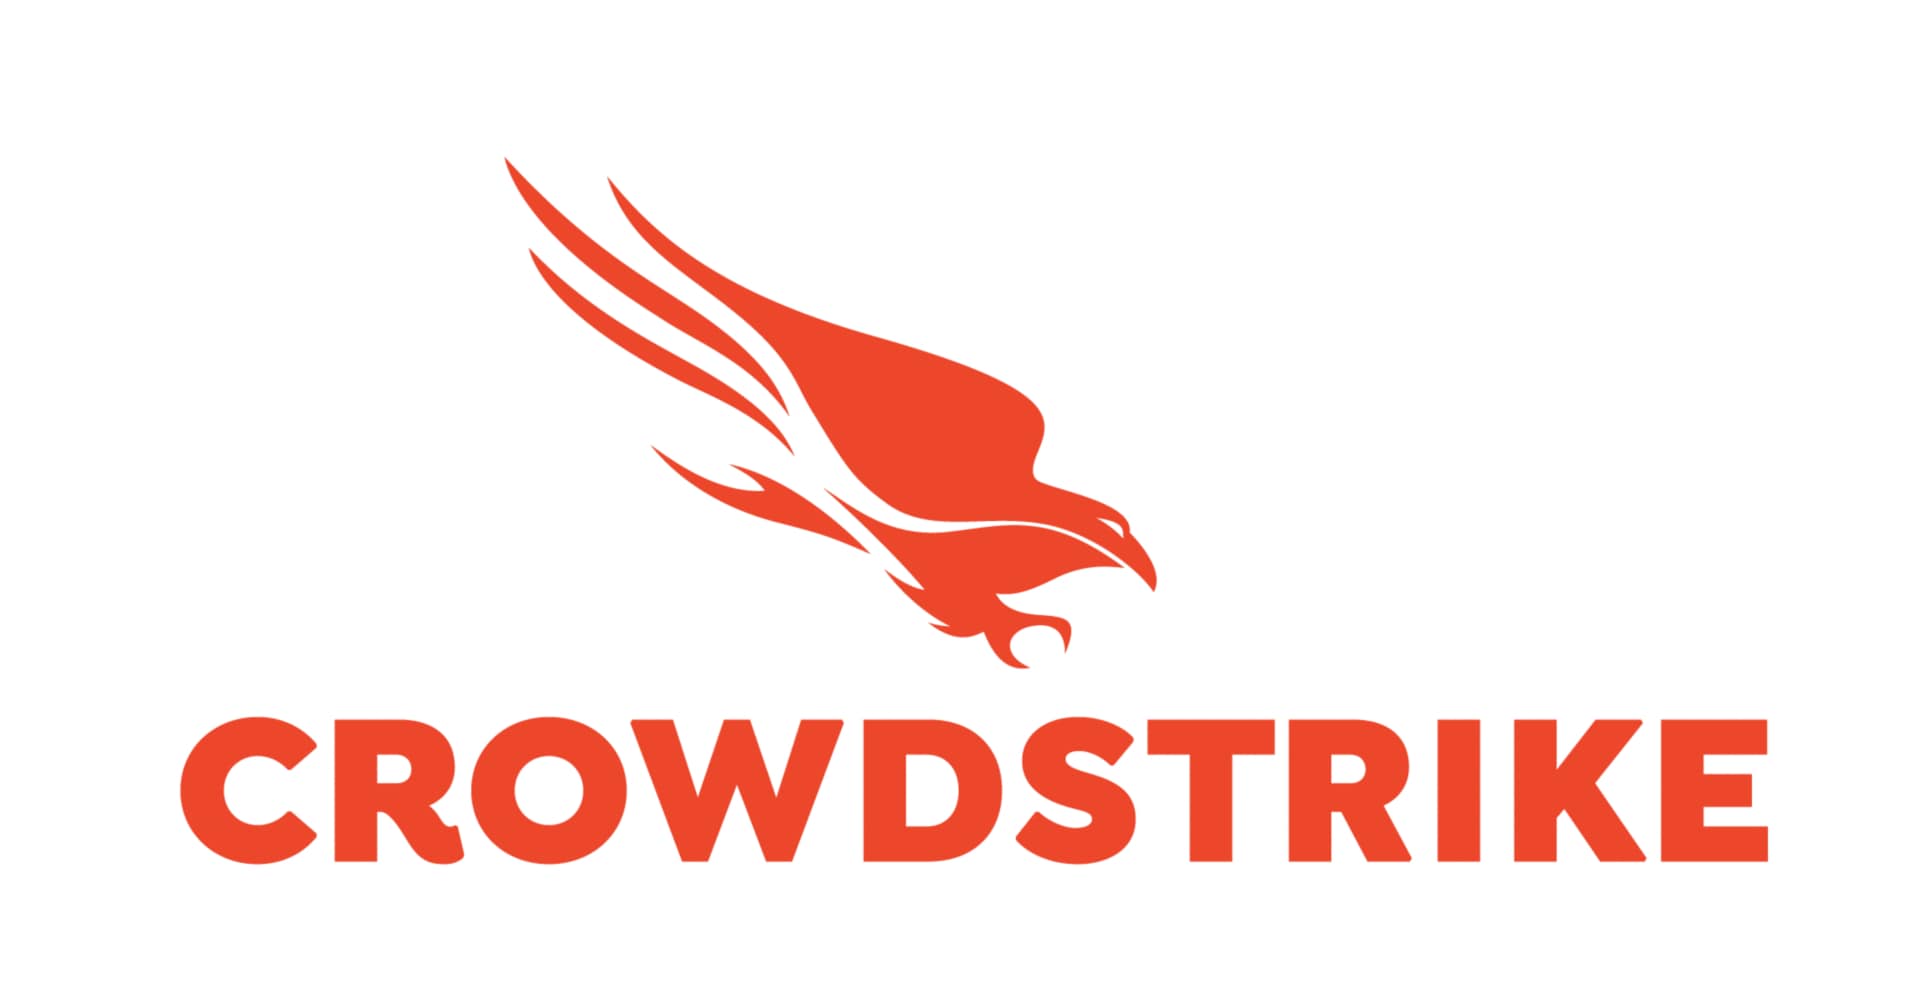 CrowdStrike 24-Month Insight for Mobile (Requires Falcon for Mobile)